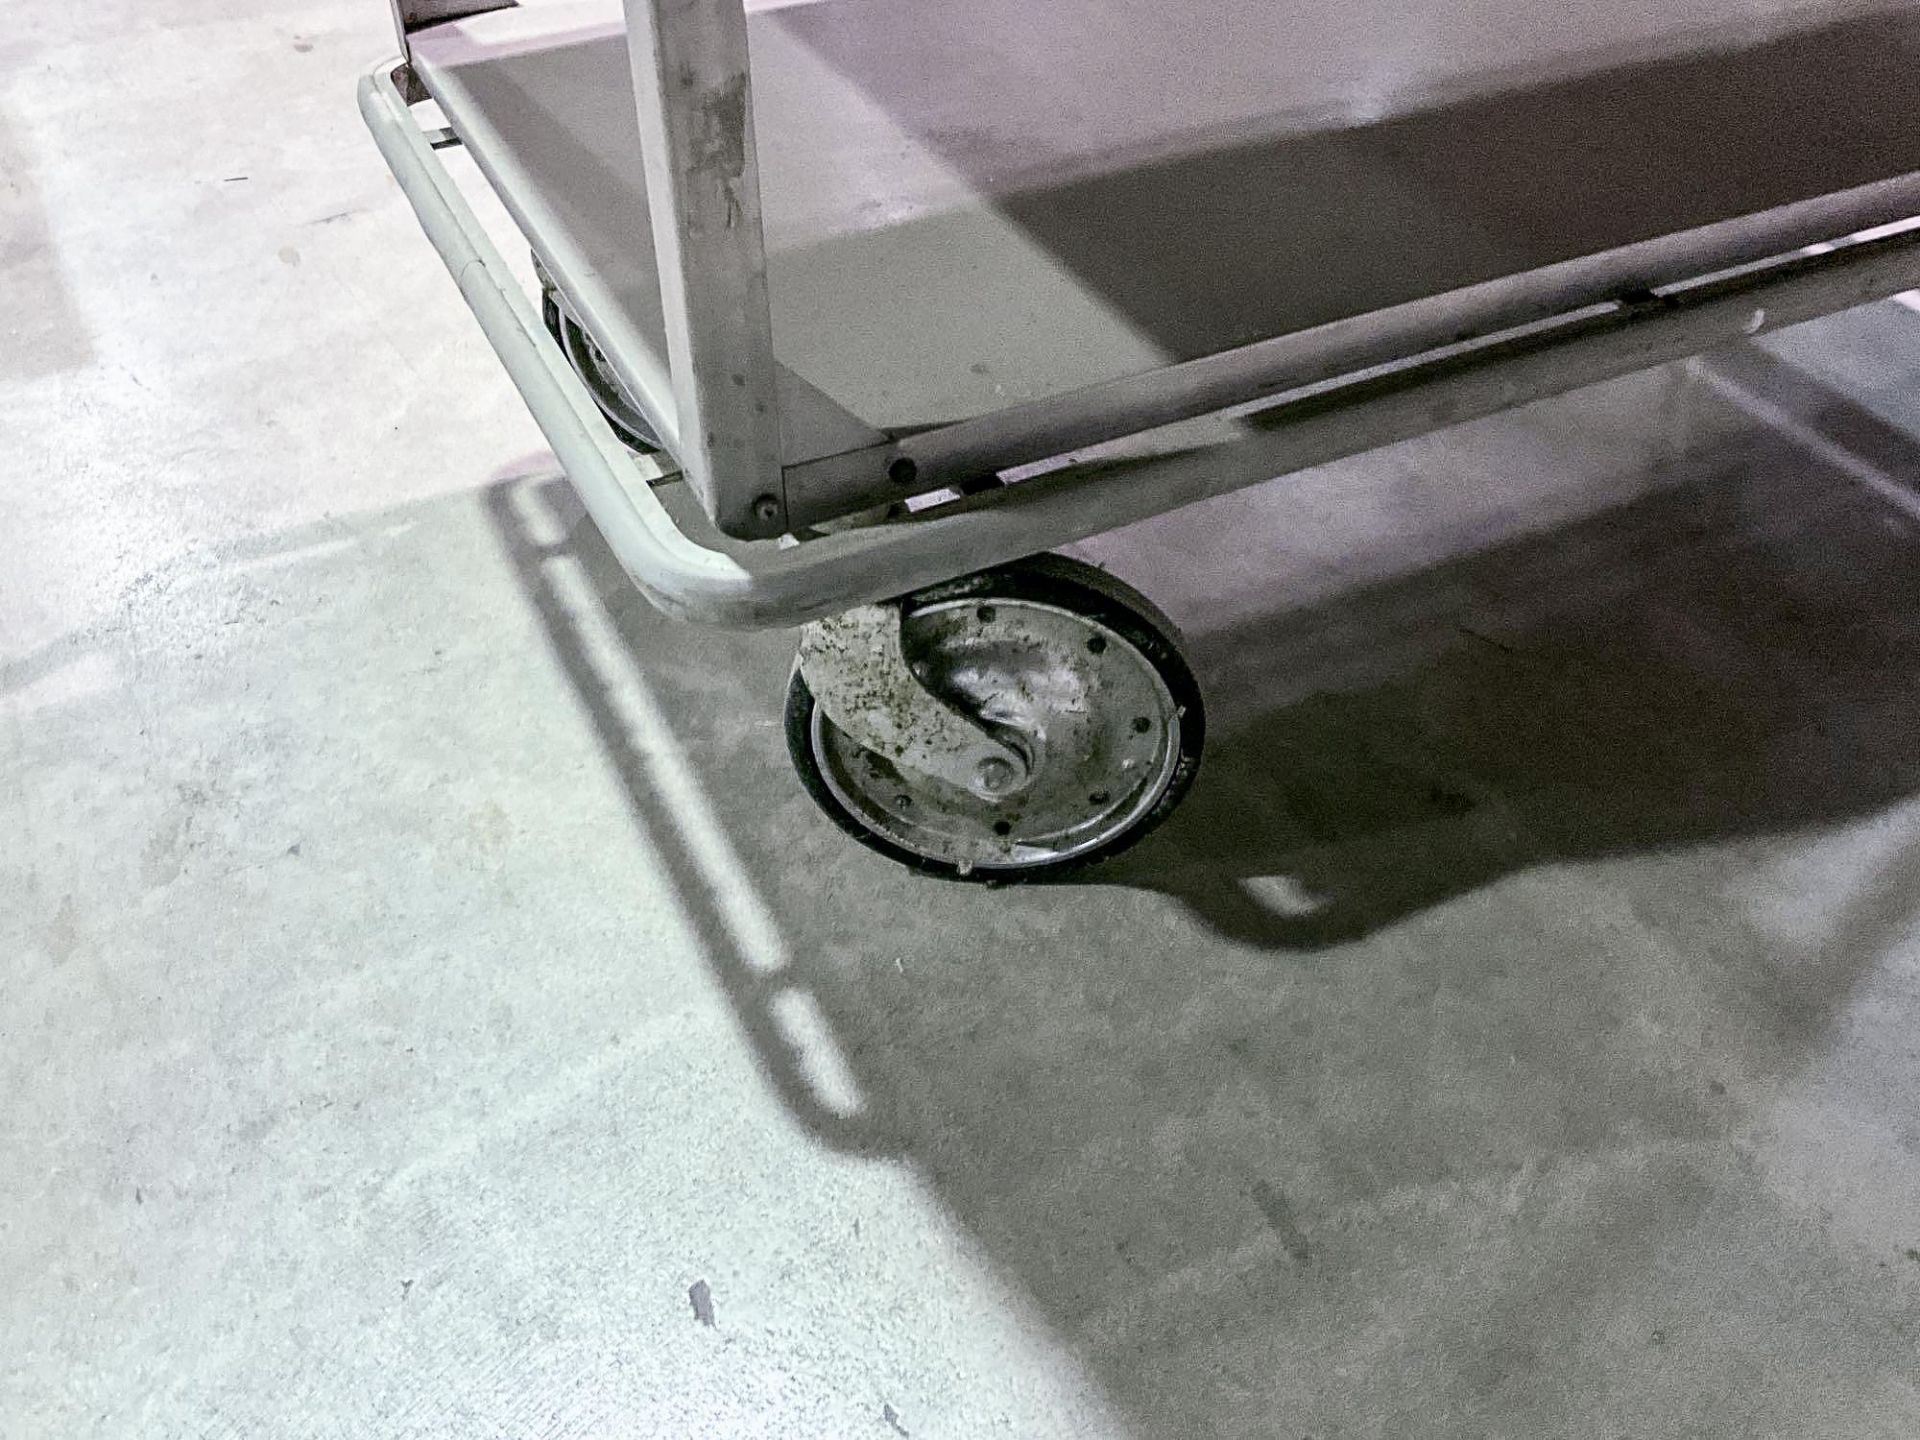 SIX SHELF STAINLESS STEEL ROLLER CART - Image 6 of 6